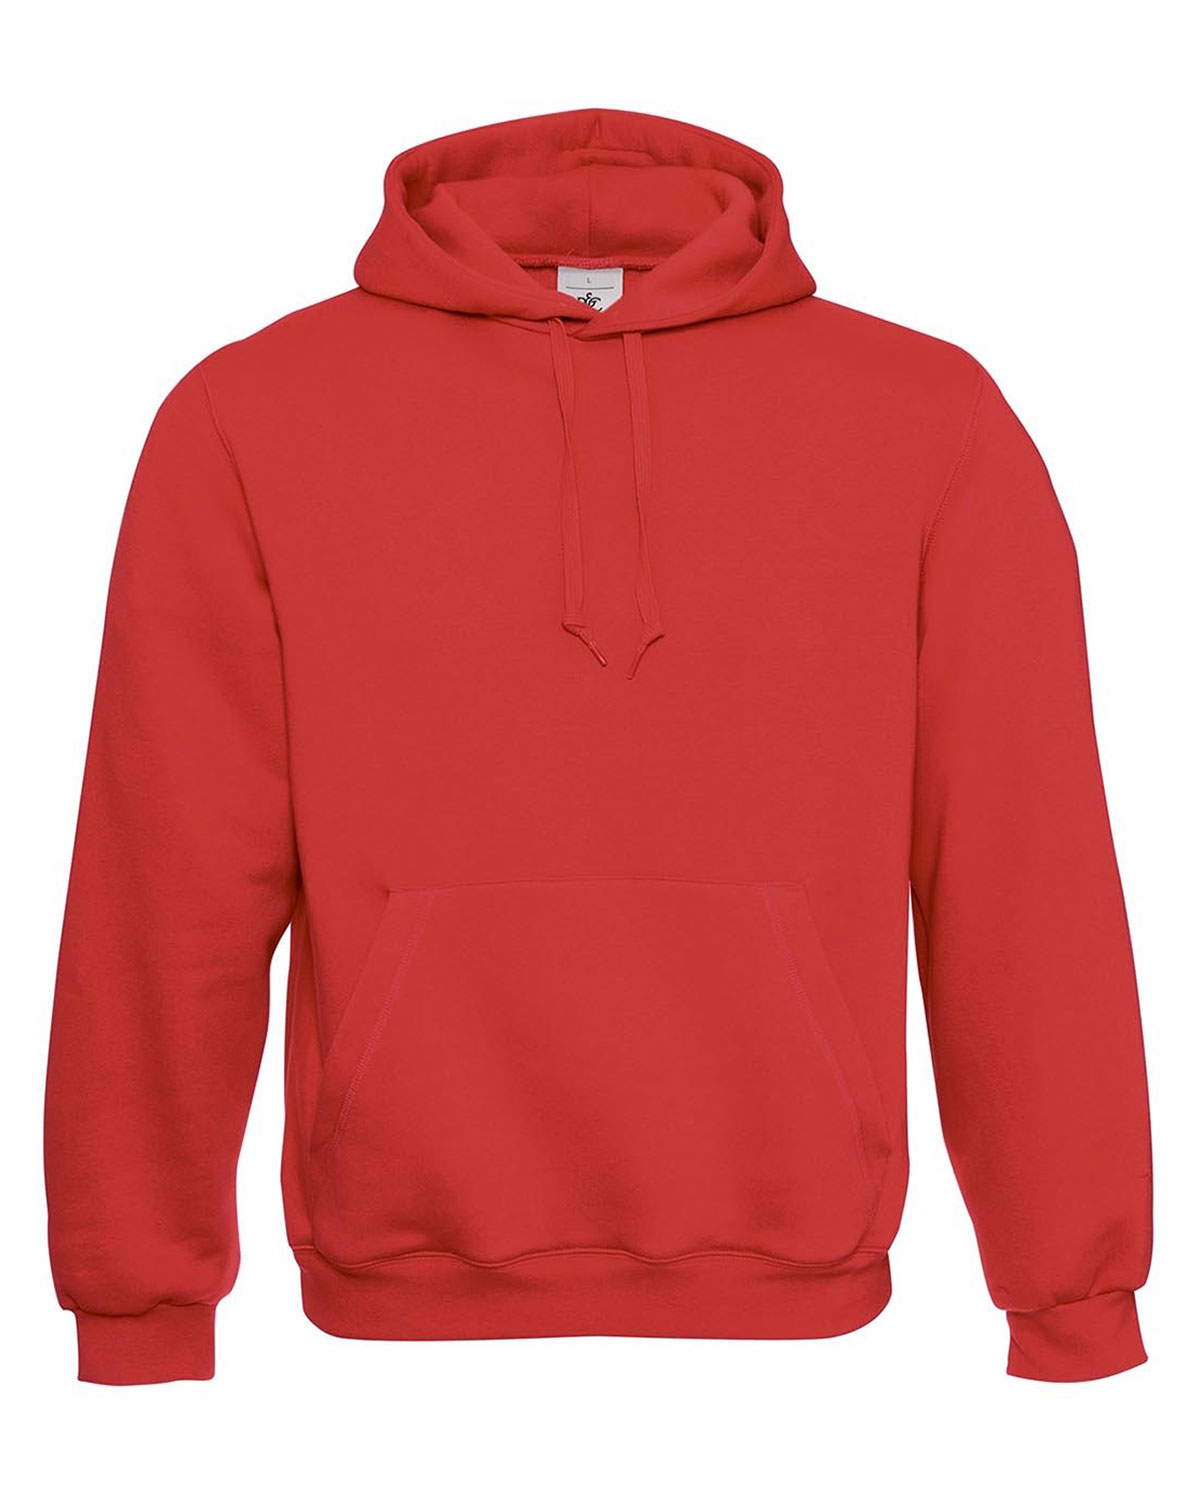 Hooded Red 3XL